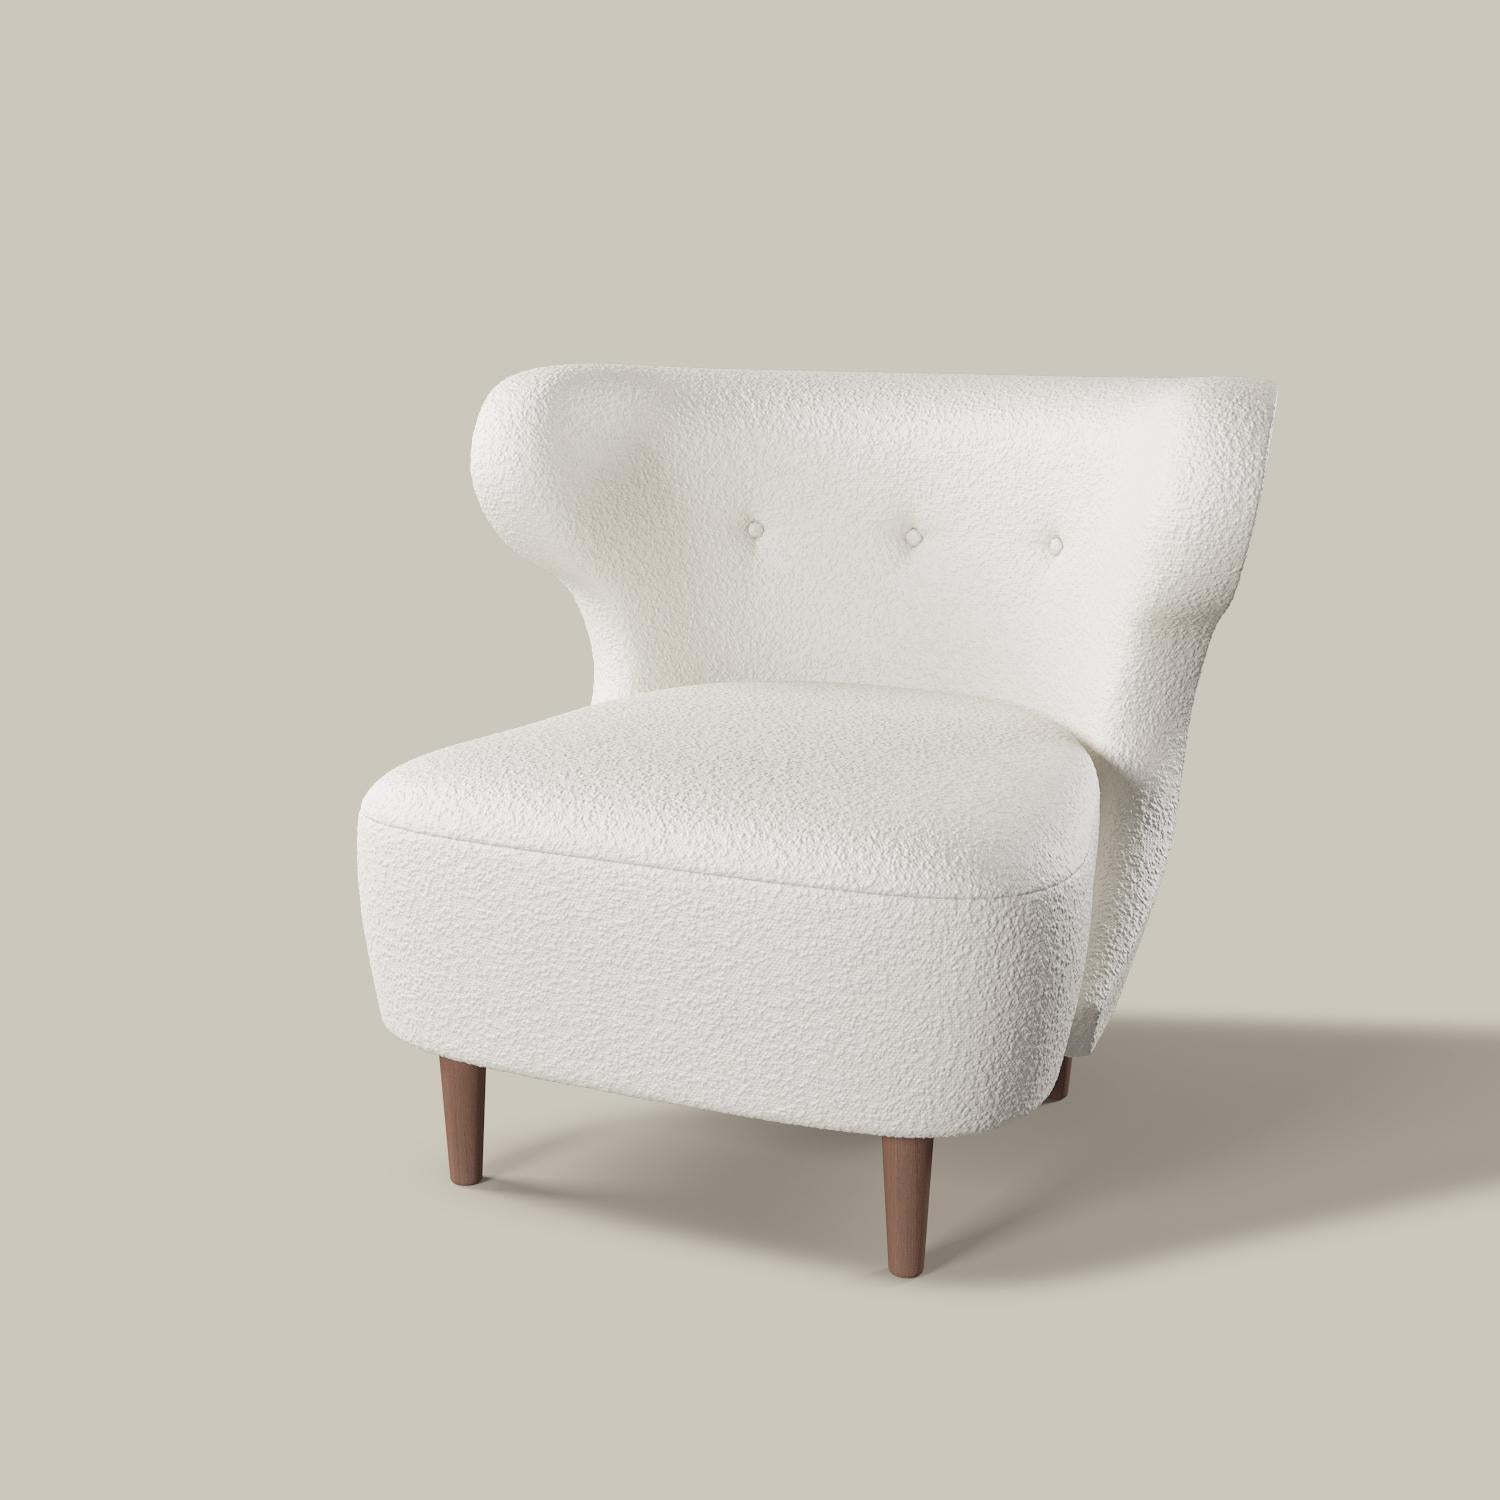 The Perou armless chair, with its sensual rounded form, is cozy but chic, also inspired by the classic Scandinavian designers such as Finn Juhl and Philip Arctander.

Ships in approximately 8-10 weeks. Dates are subject to change based current